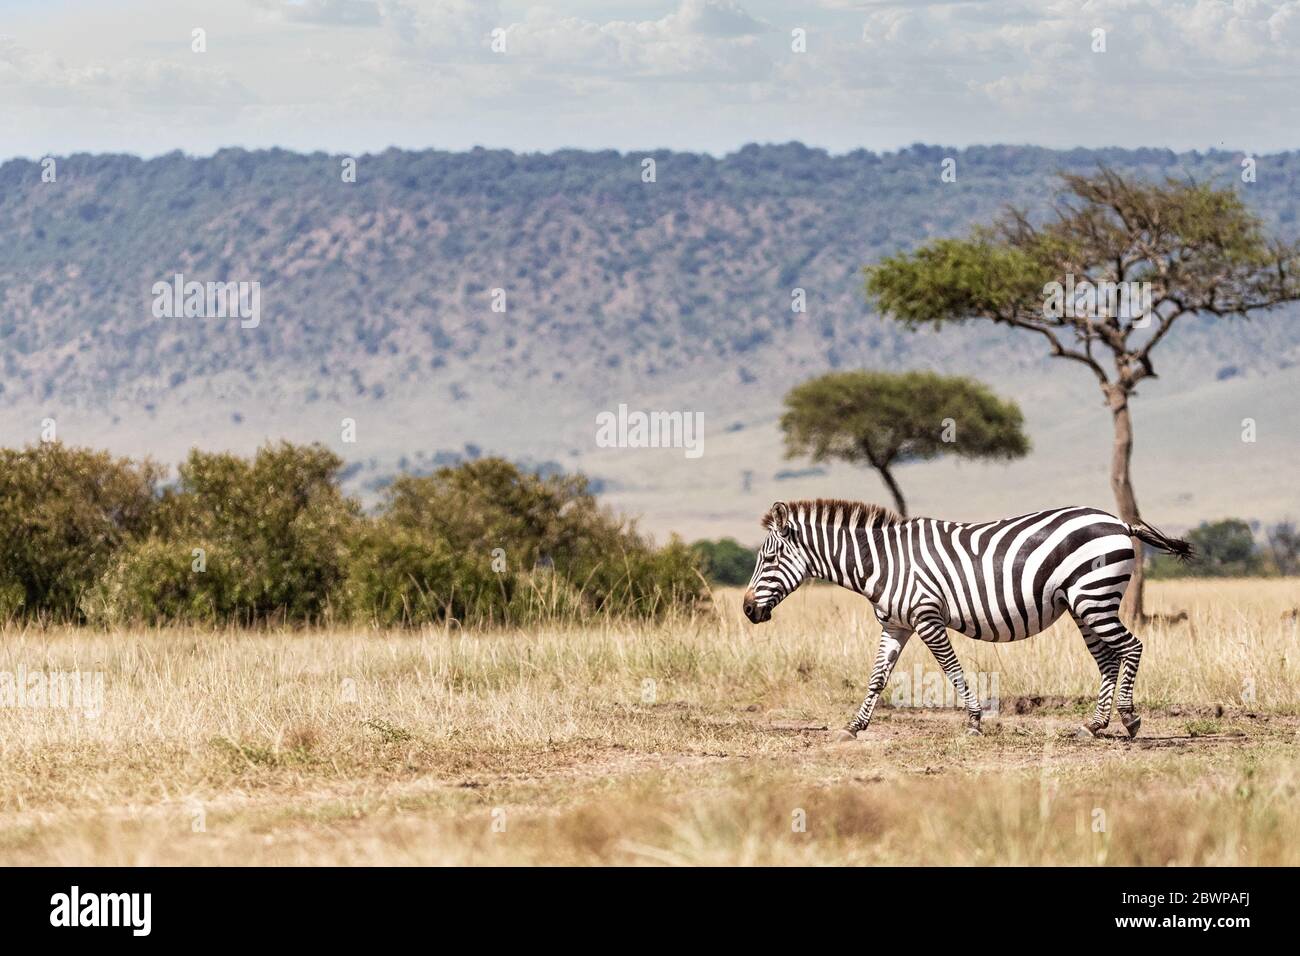 Zebra walking through field in Maasai Mara area of Kenya, Africa with room for text in background Stock Photo